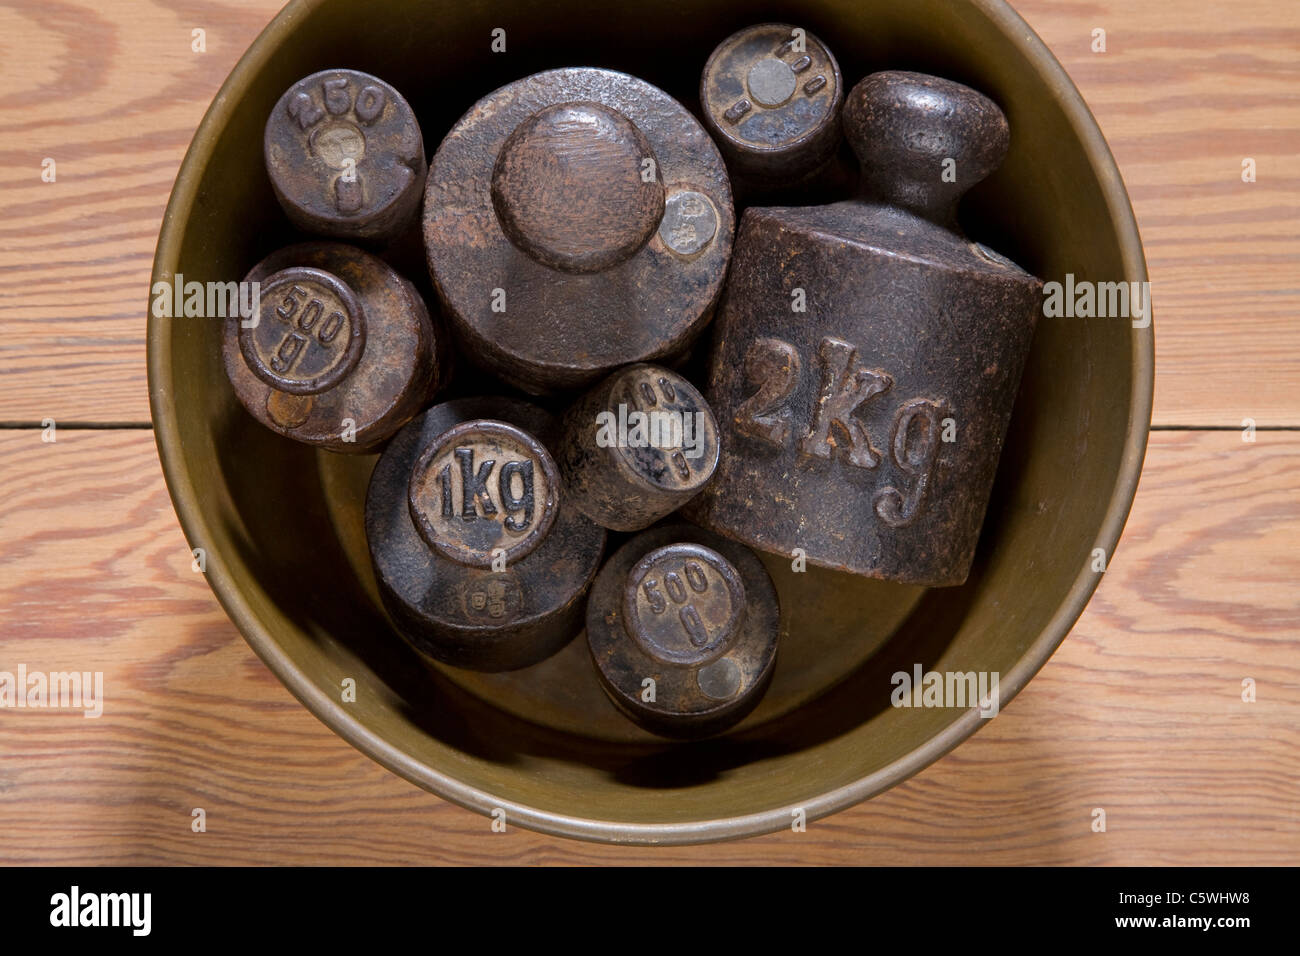 Different iron scale weights , elevated view Stock Photo